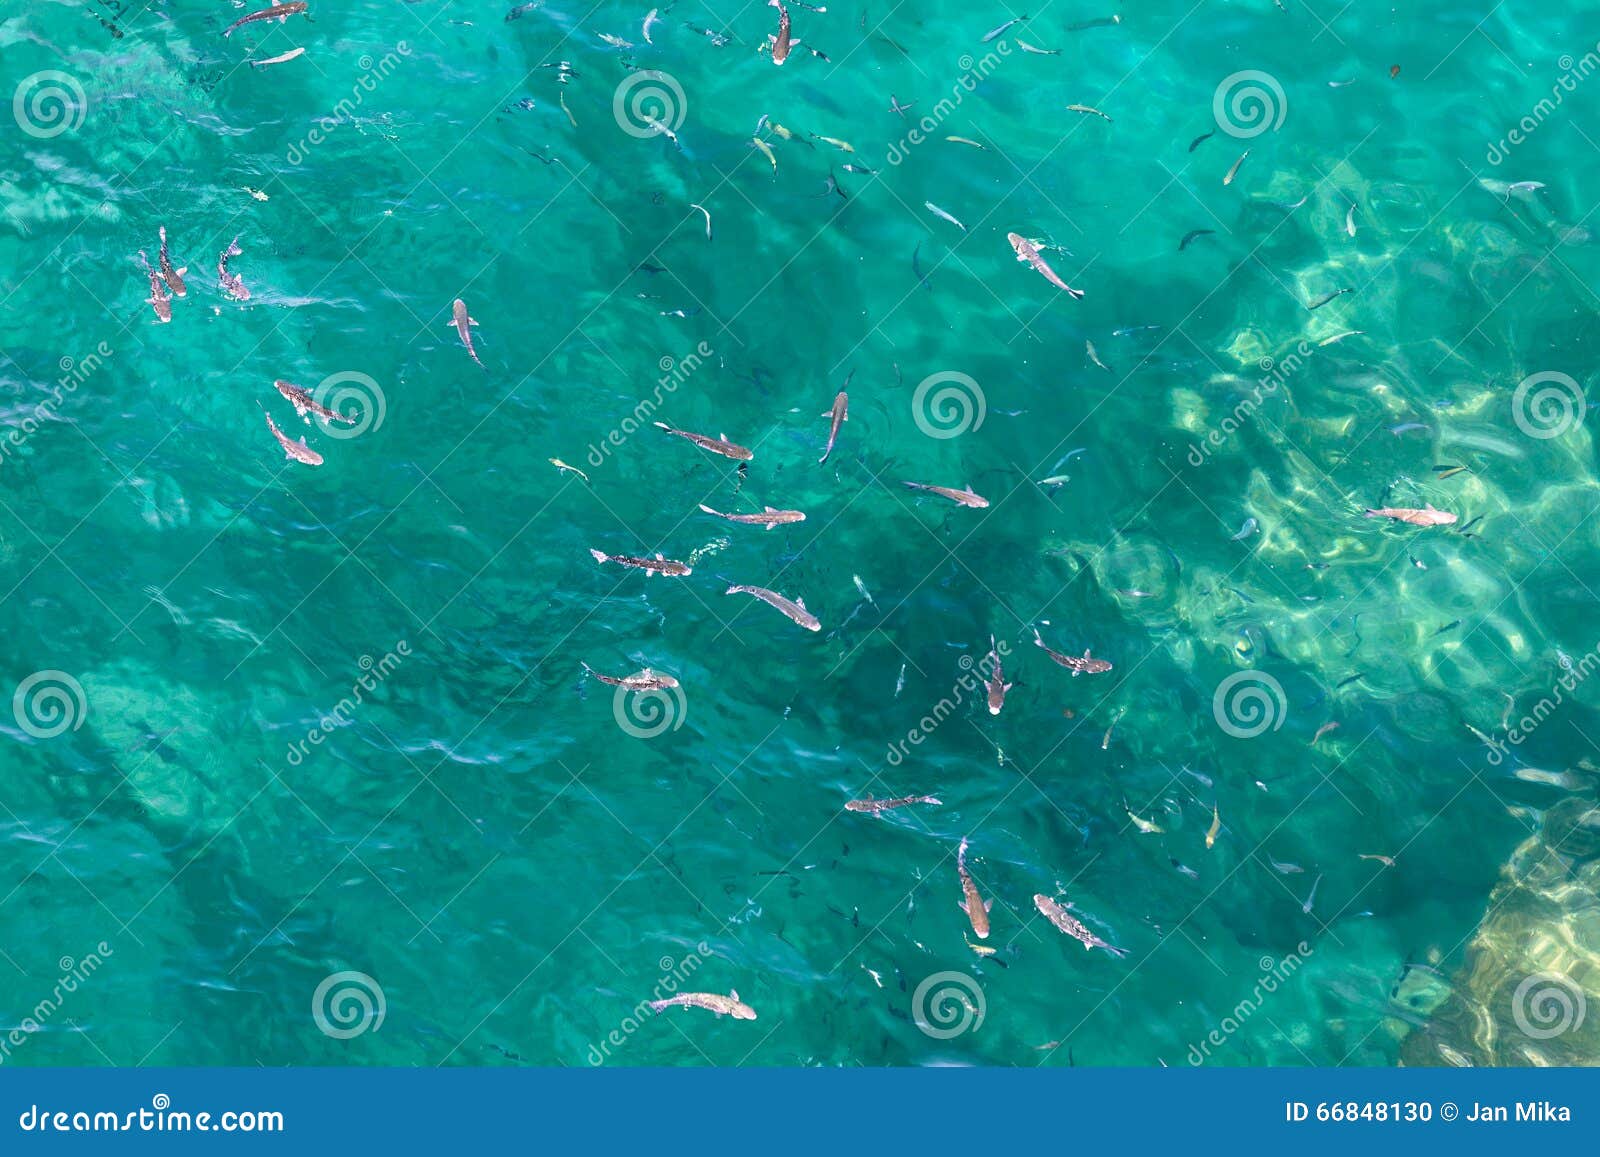 many fish on the surface of the alboran sea in the strait of gibraltar